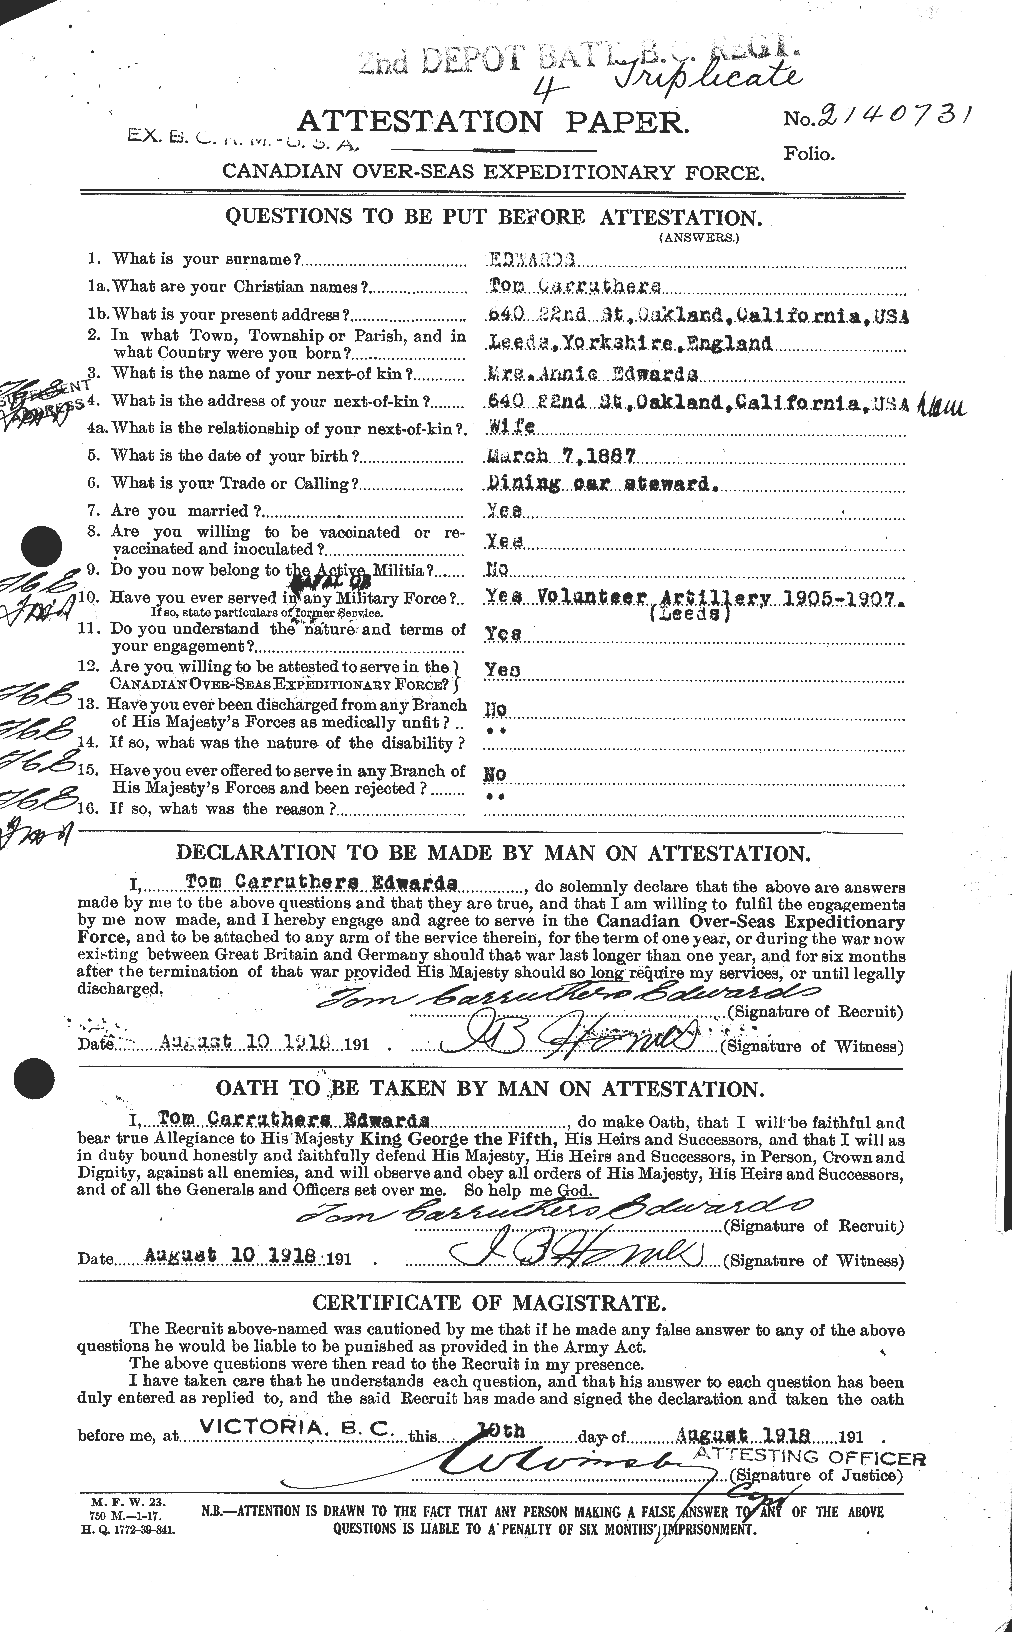 Personnel Records of the First World War - CEF 310361a